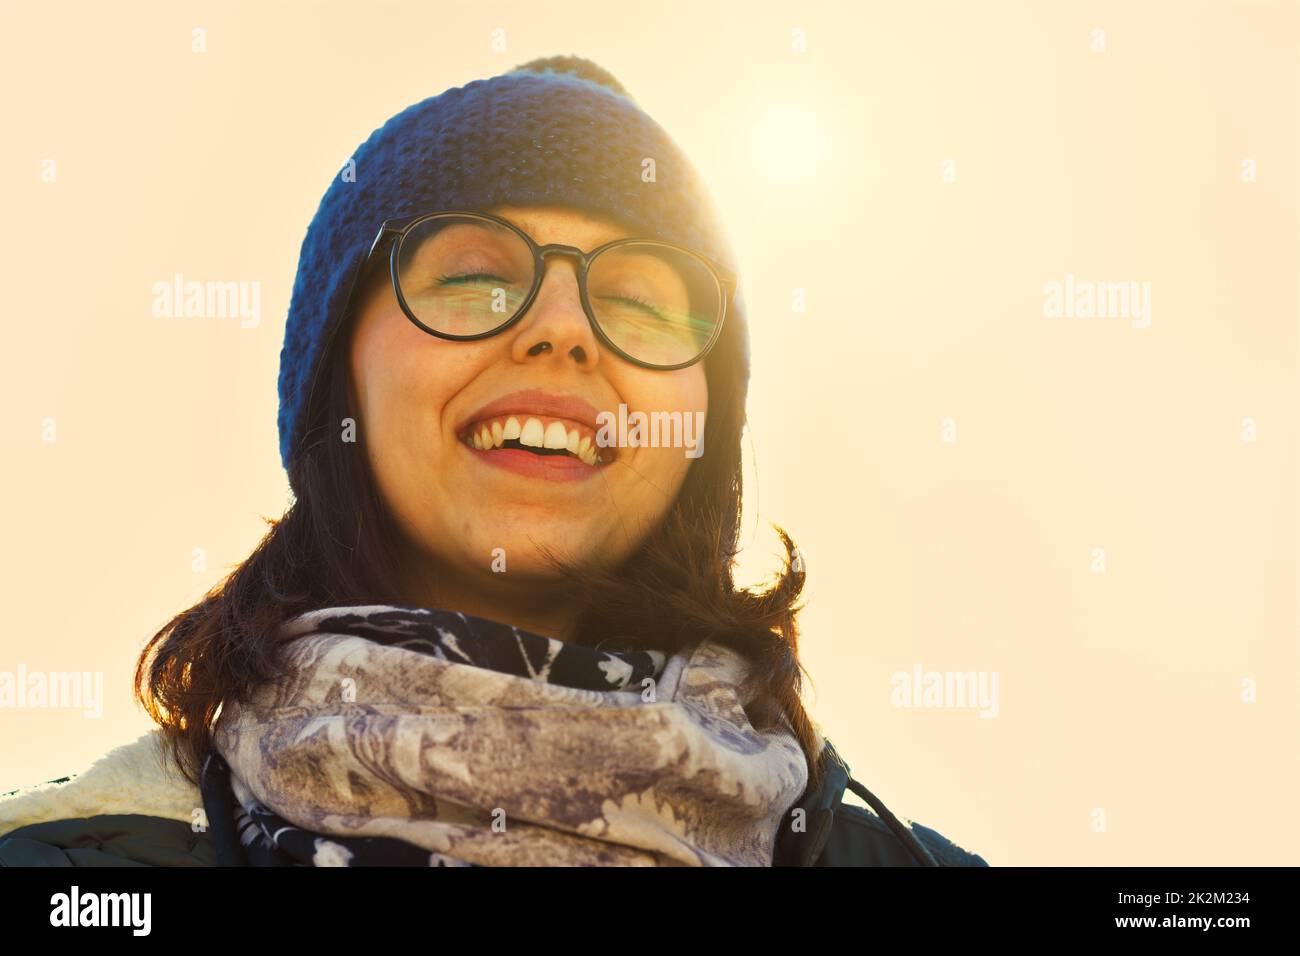 Warm light image of a happy laughing woman in a beanie Stock Photo